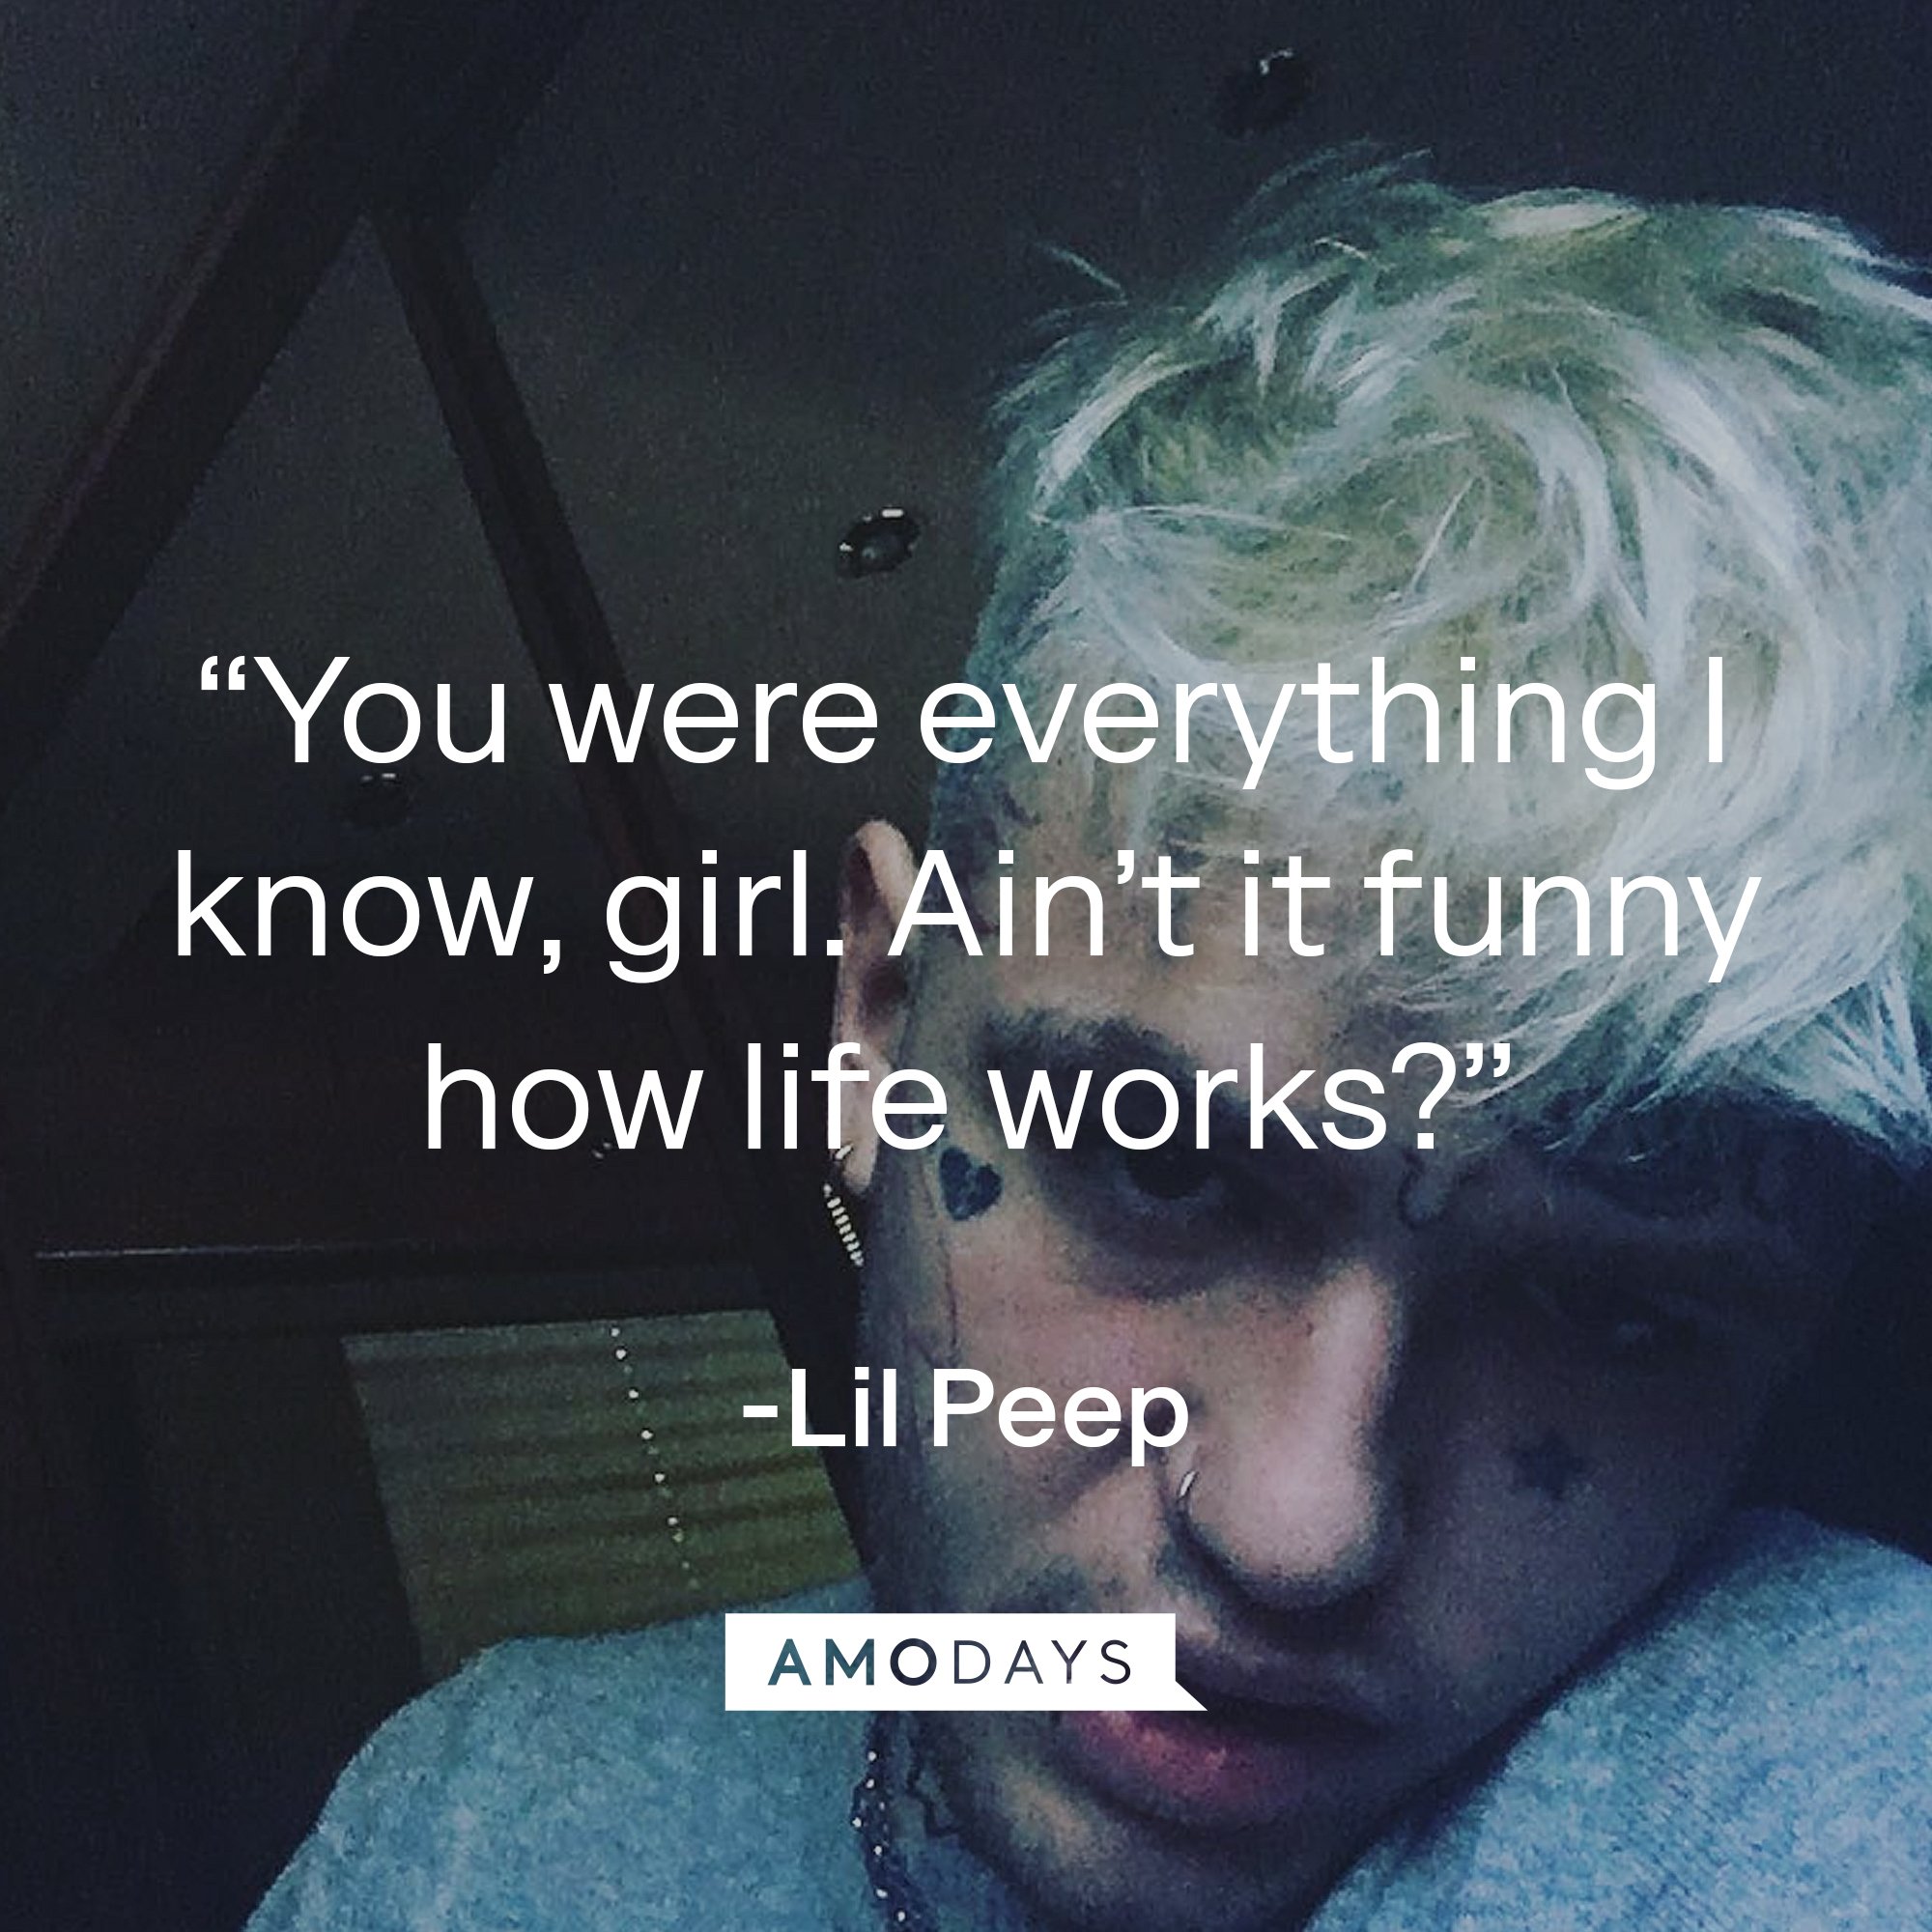 Lil Peep's quote: “You were everything I know, girl. Ain’t it funny how life works?” | Image: AmoDays